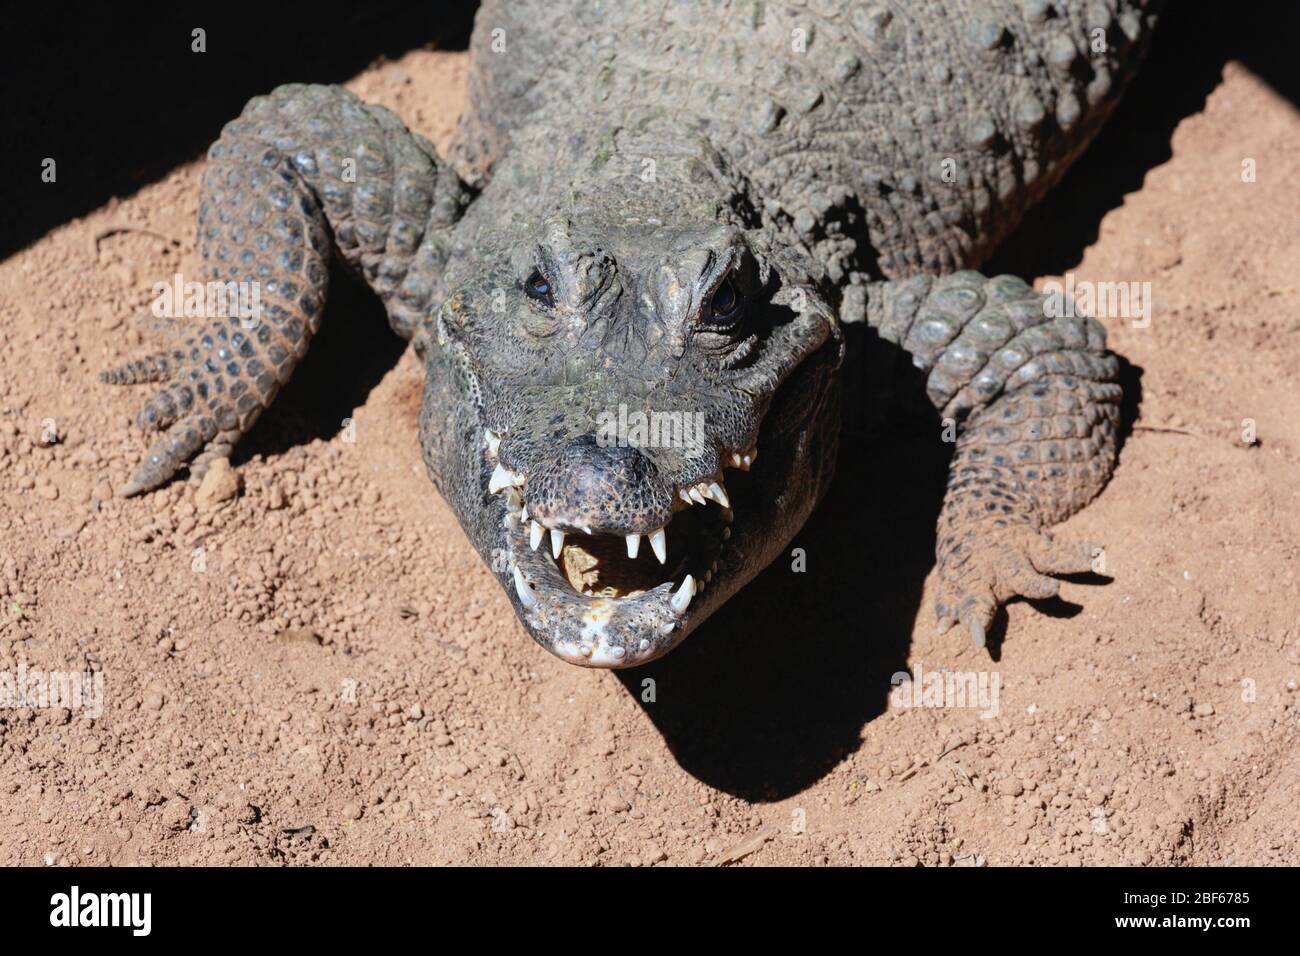 Dwarf crocodile, also known as the African dwarf crocodile , bony crocodile or broad-snouted crocodile.  Osteolaemus tetraspis.  This example photogra Stock Photo